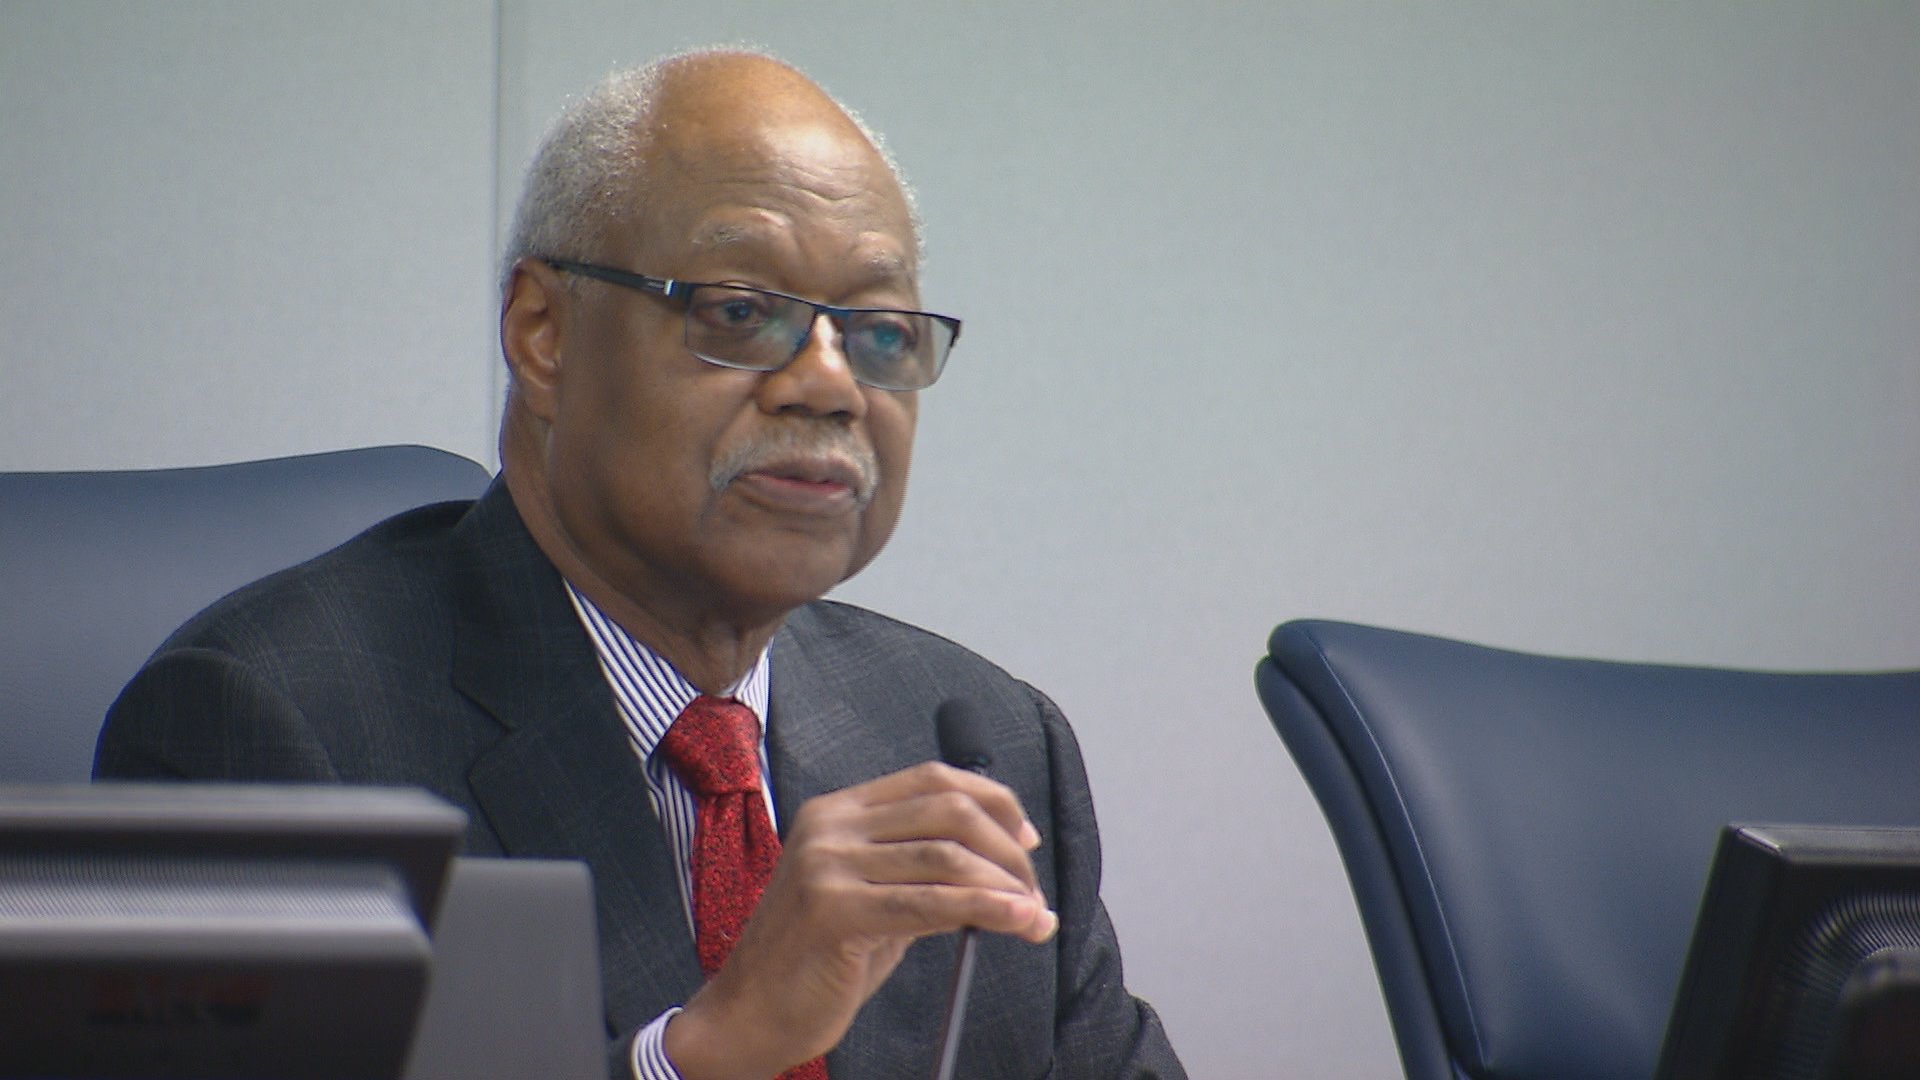 Board of Education President Frank Clark said Monday that Chicago Public Schools could see up to $450 million from the state if a new education funding deal is approved in Springfield. (Chicago Tonight)